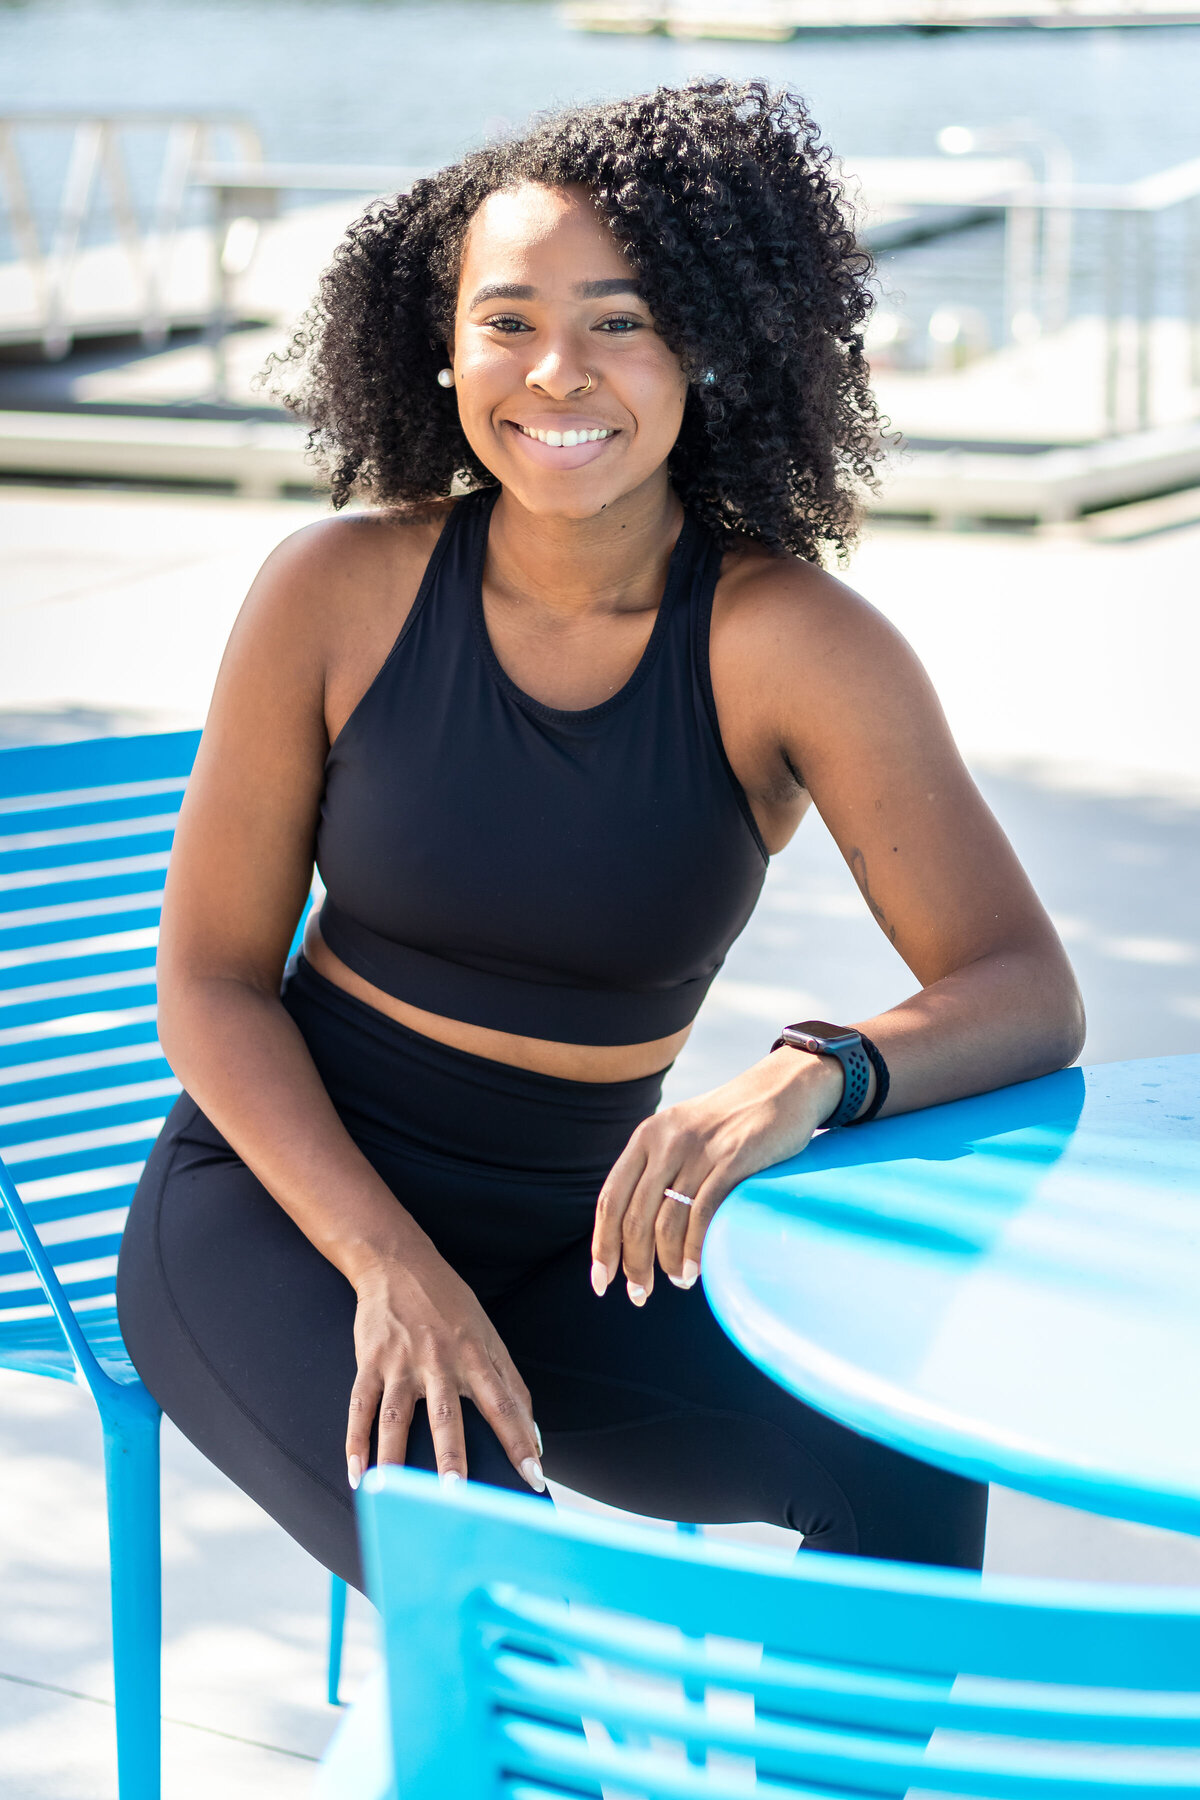 magaly_tampa_austin_fitness_fabletics_wellness_branding_brand_photography-06